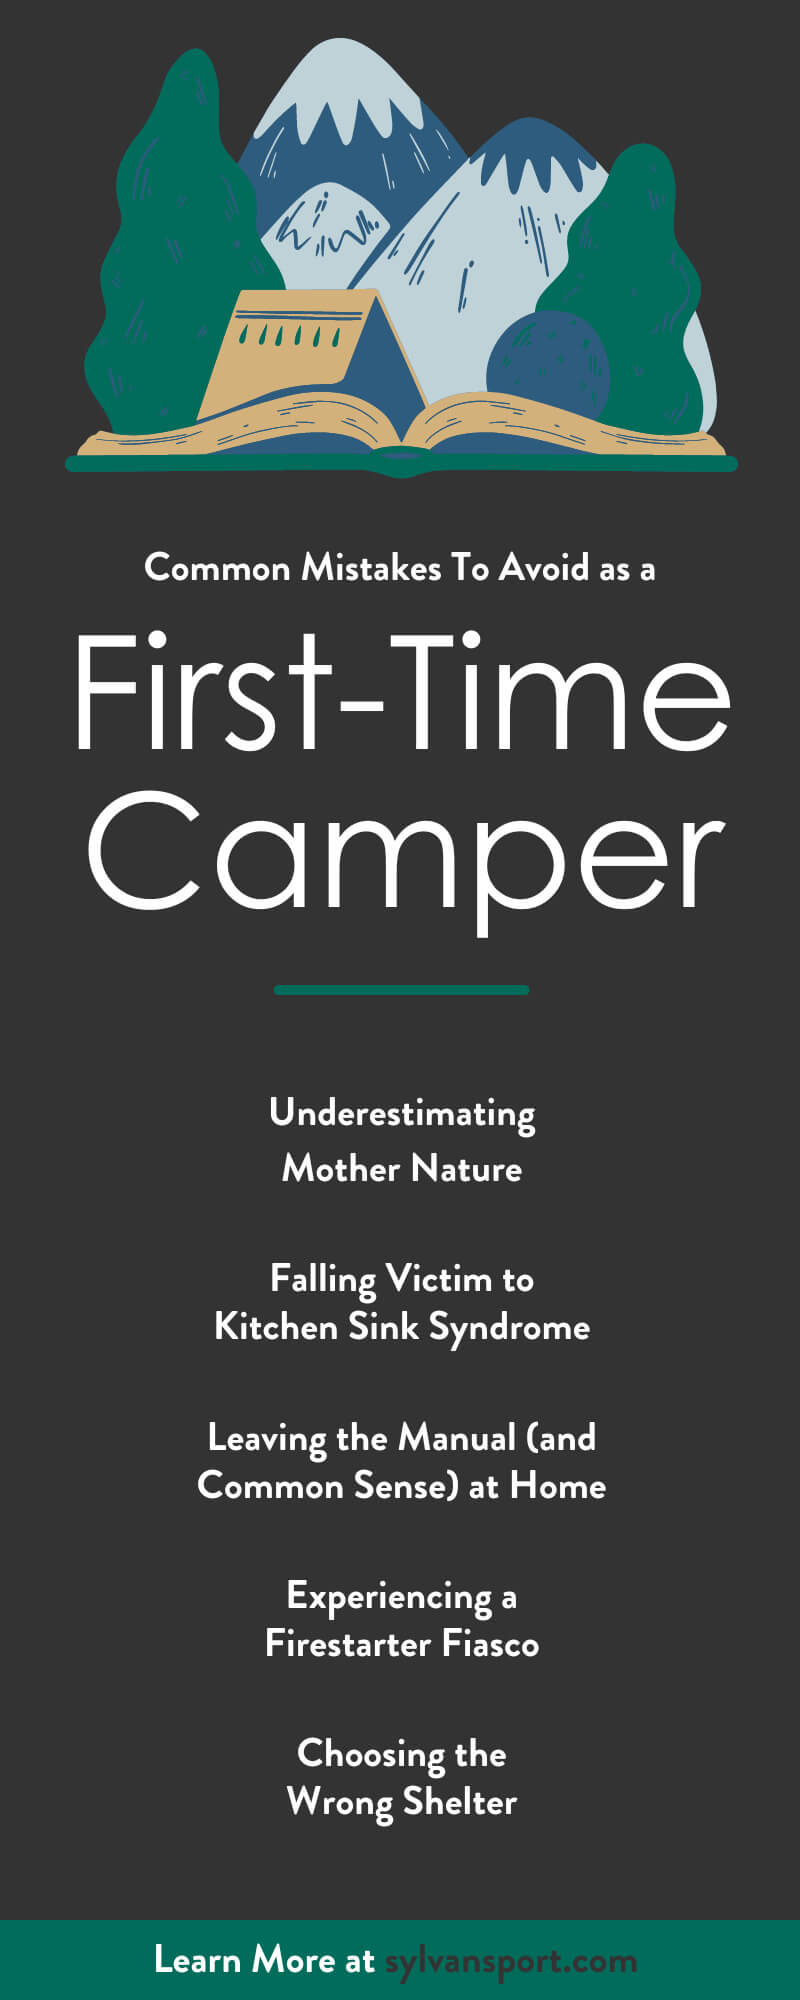 7 Common Mistakes To Avoid as a First-Time Camper
